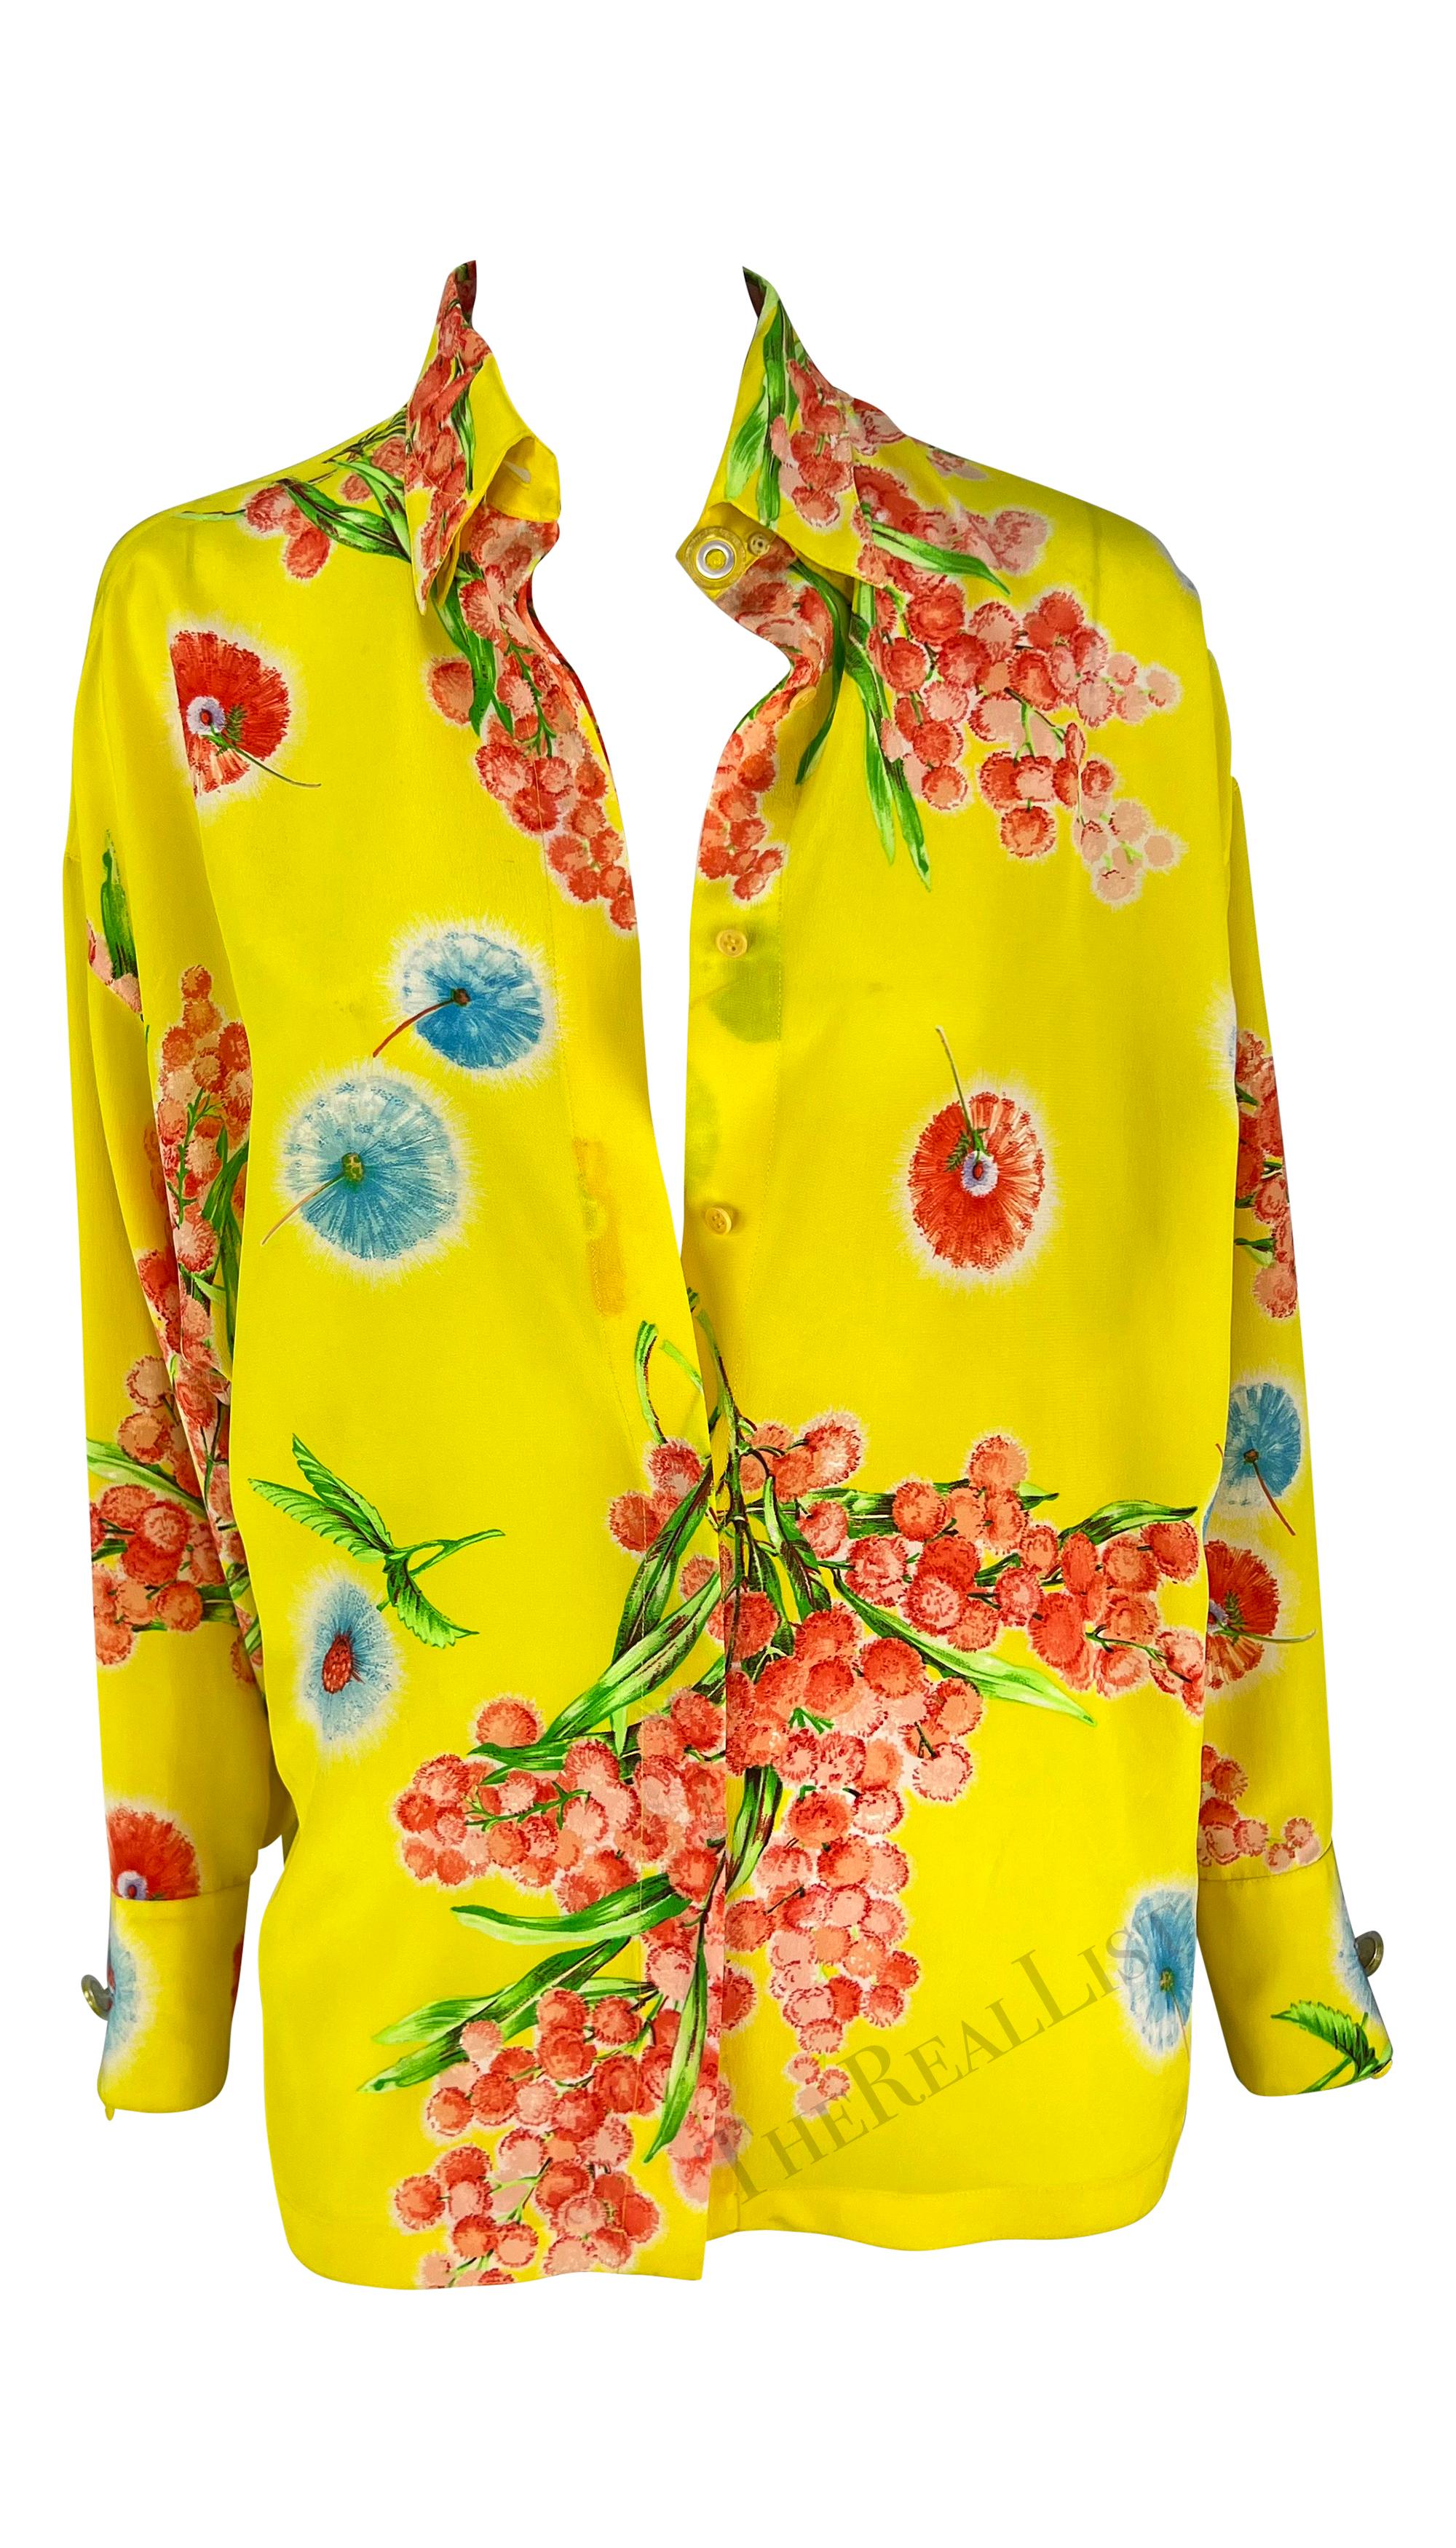 Presenting a beautiful yellow floral silk Gianni Versace Couture button up shirt, designed by Gianni Versace. Constructed entirely of printed silk, this shirt from 1996 features bright blue and orange/red flowers a top a yellow background. The